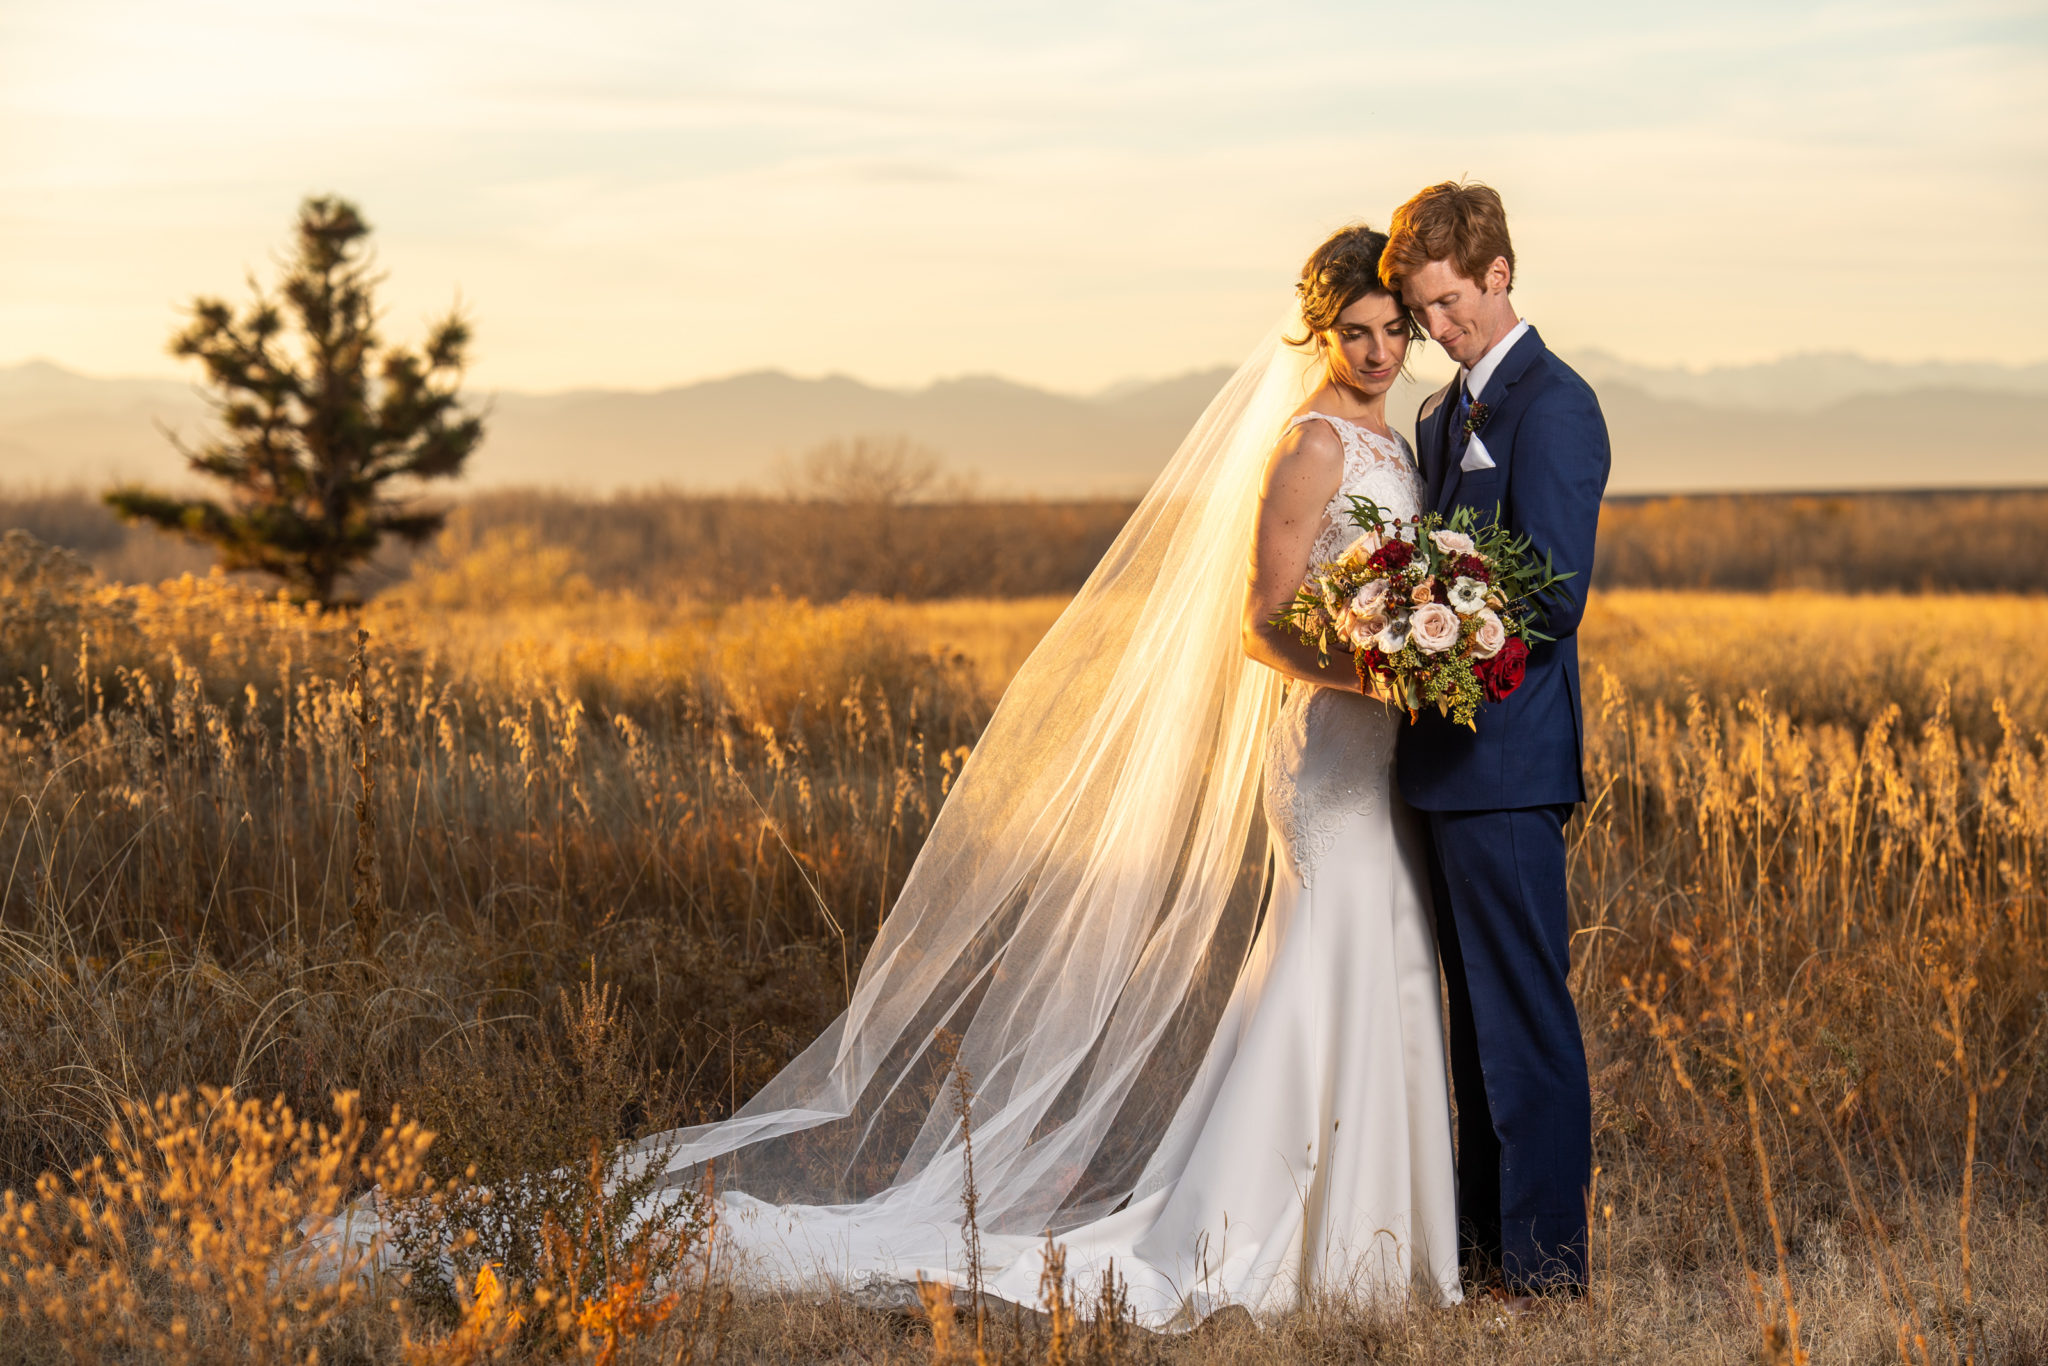 Bride and groom pose for photos at Cherry Creek State Park in Aurora, Colorado.